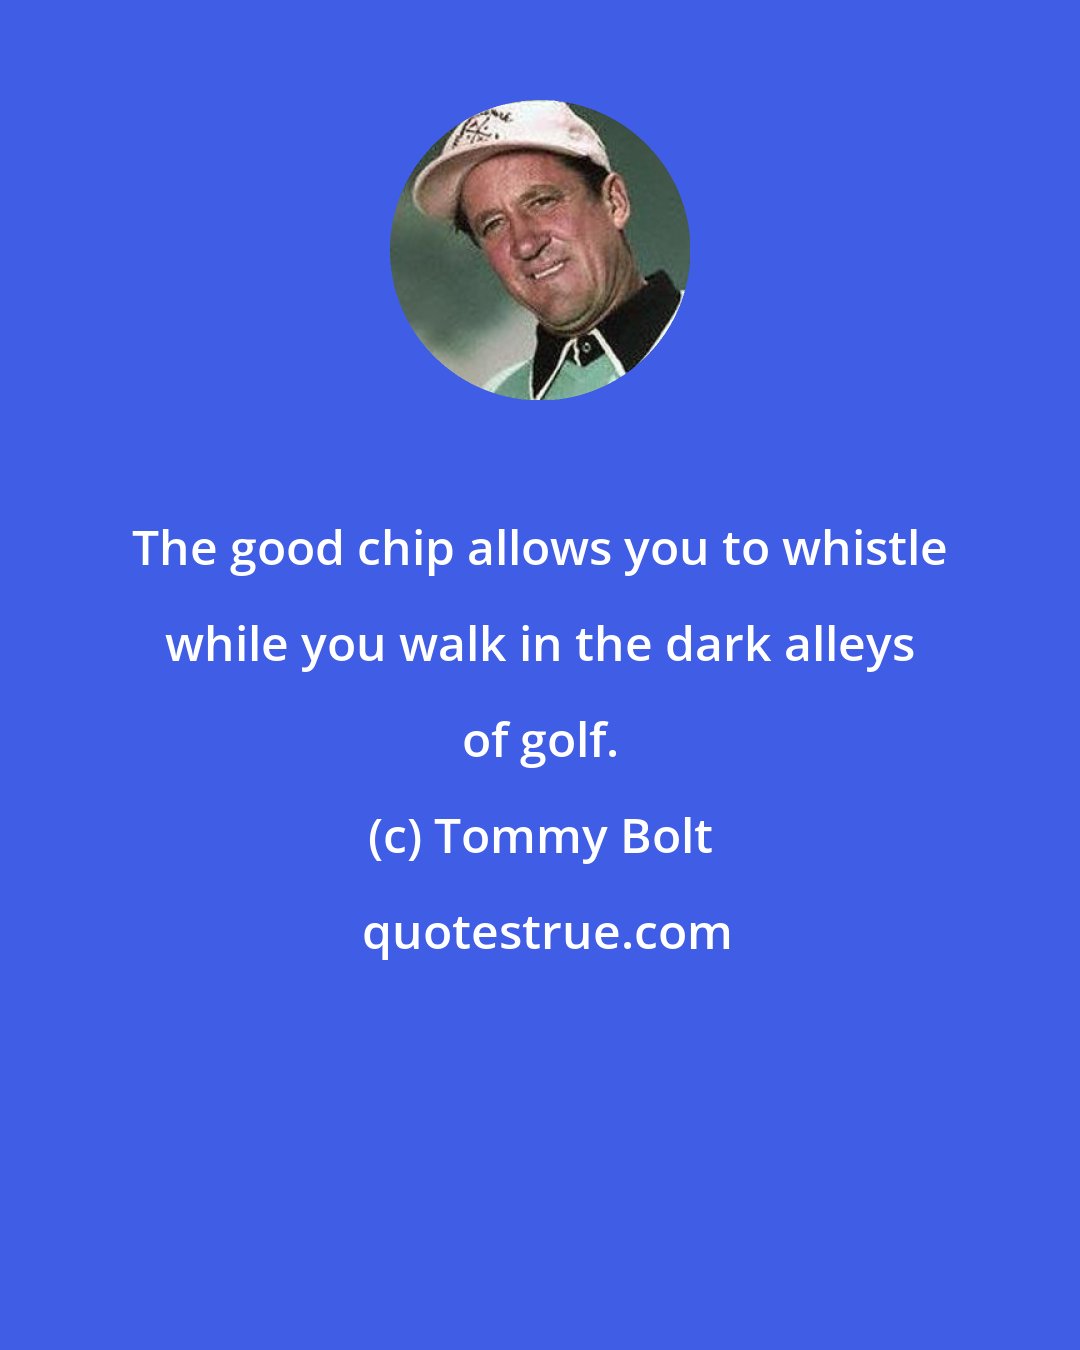 Tommy Bolt: The good chip allows you to whistle while you walk in the dark alleys of golf.